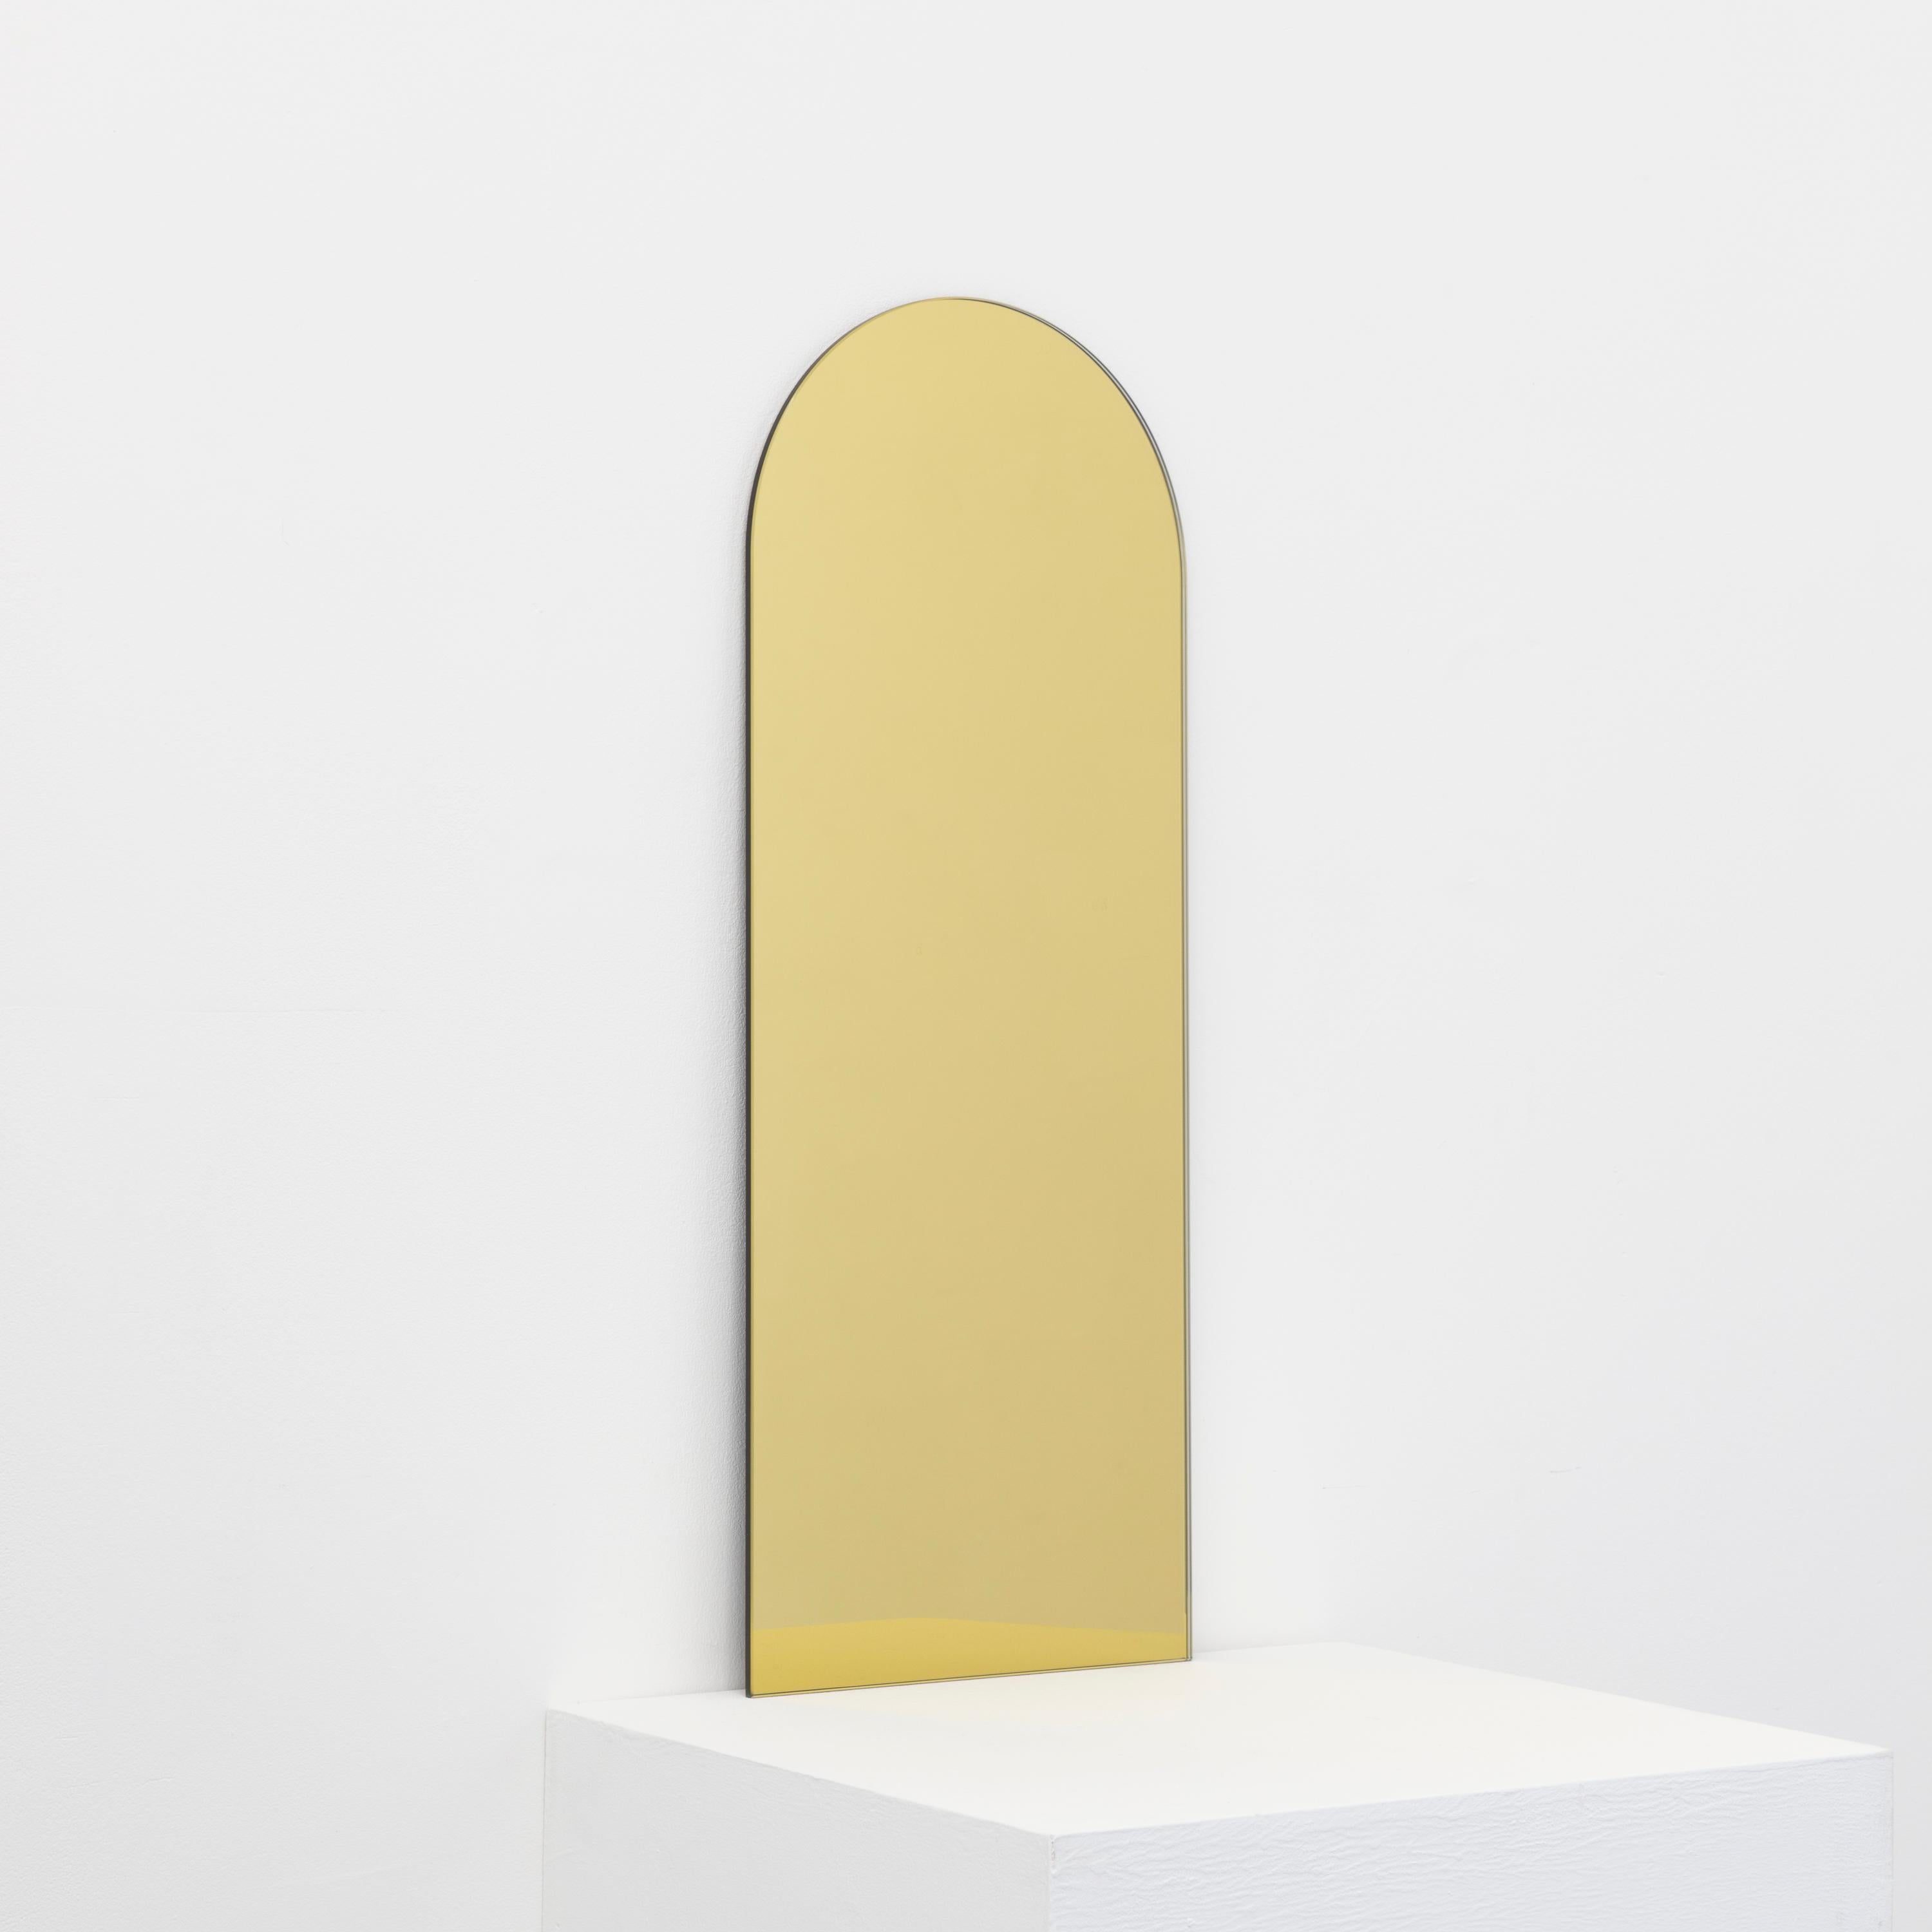 Minimalist arch shaped frameless gold tinted mirror with a floating effect. Quality design that ensures the mirror sits perfectly parallel to the wall. Designed and made in London, UK.

Fitted with professional plates not visible once installed for